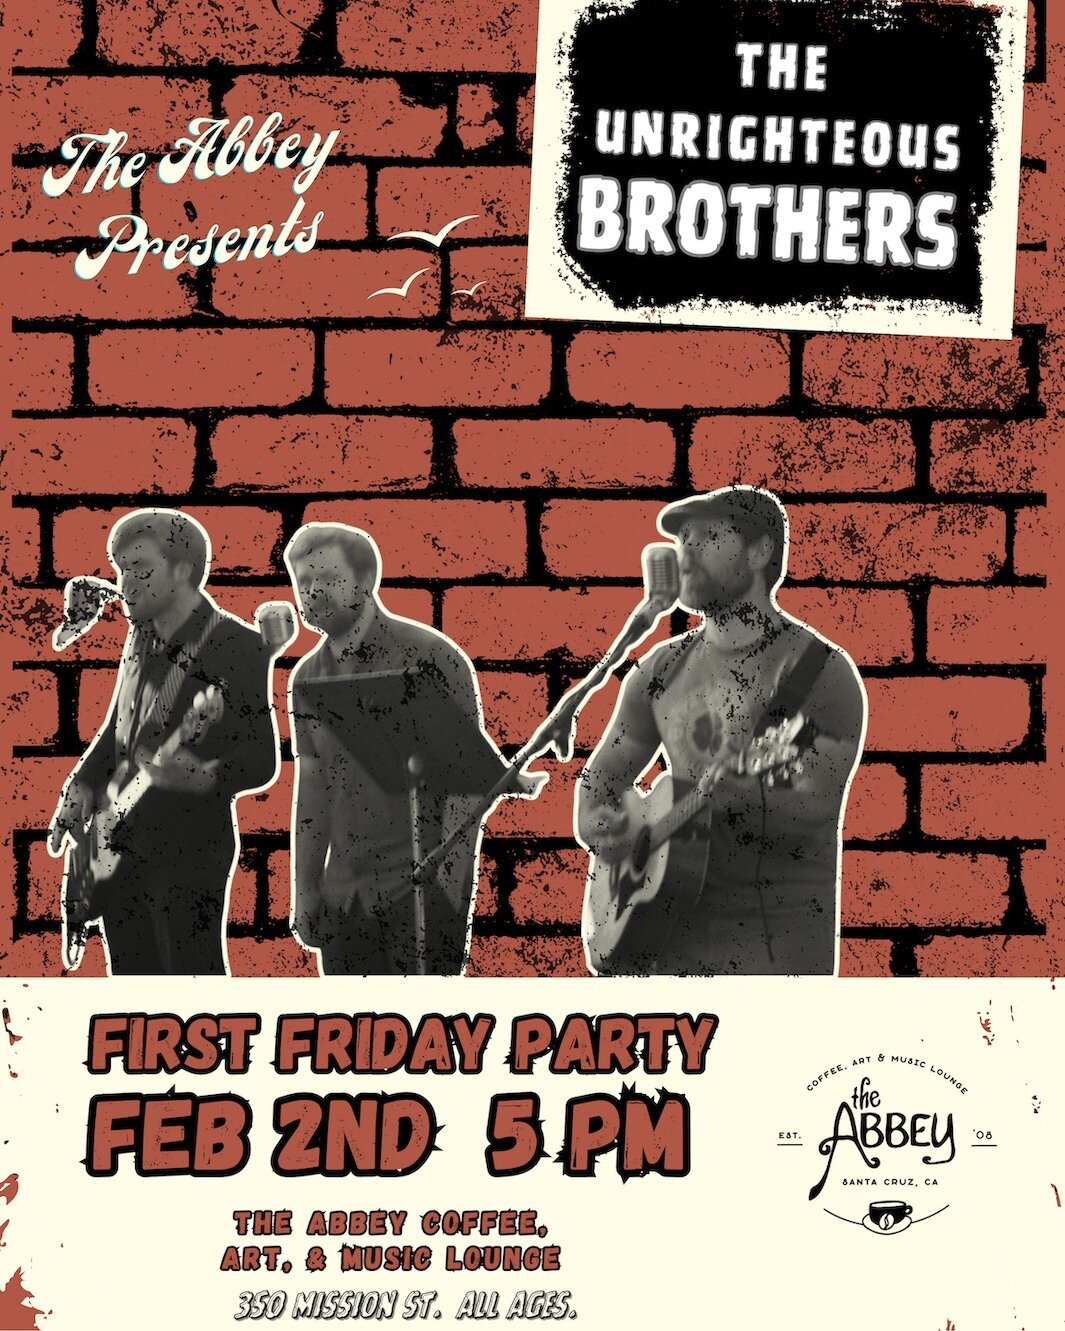 Tonight is First Friday!!! Come escape the rain with a free concert, new drinks, and the Americana sounds of The Unrighteous Brothers!!!
#firstfridaysantacruz #theabbeysc #ucsc